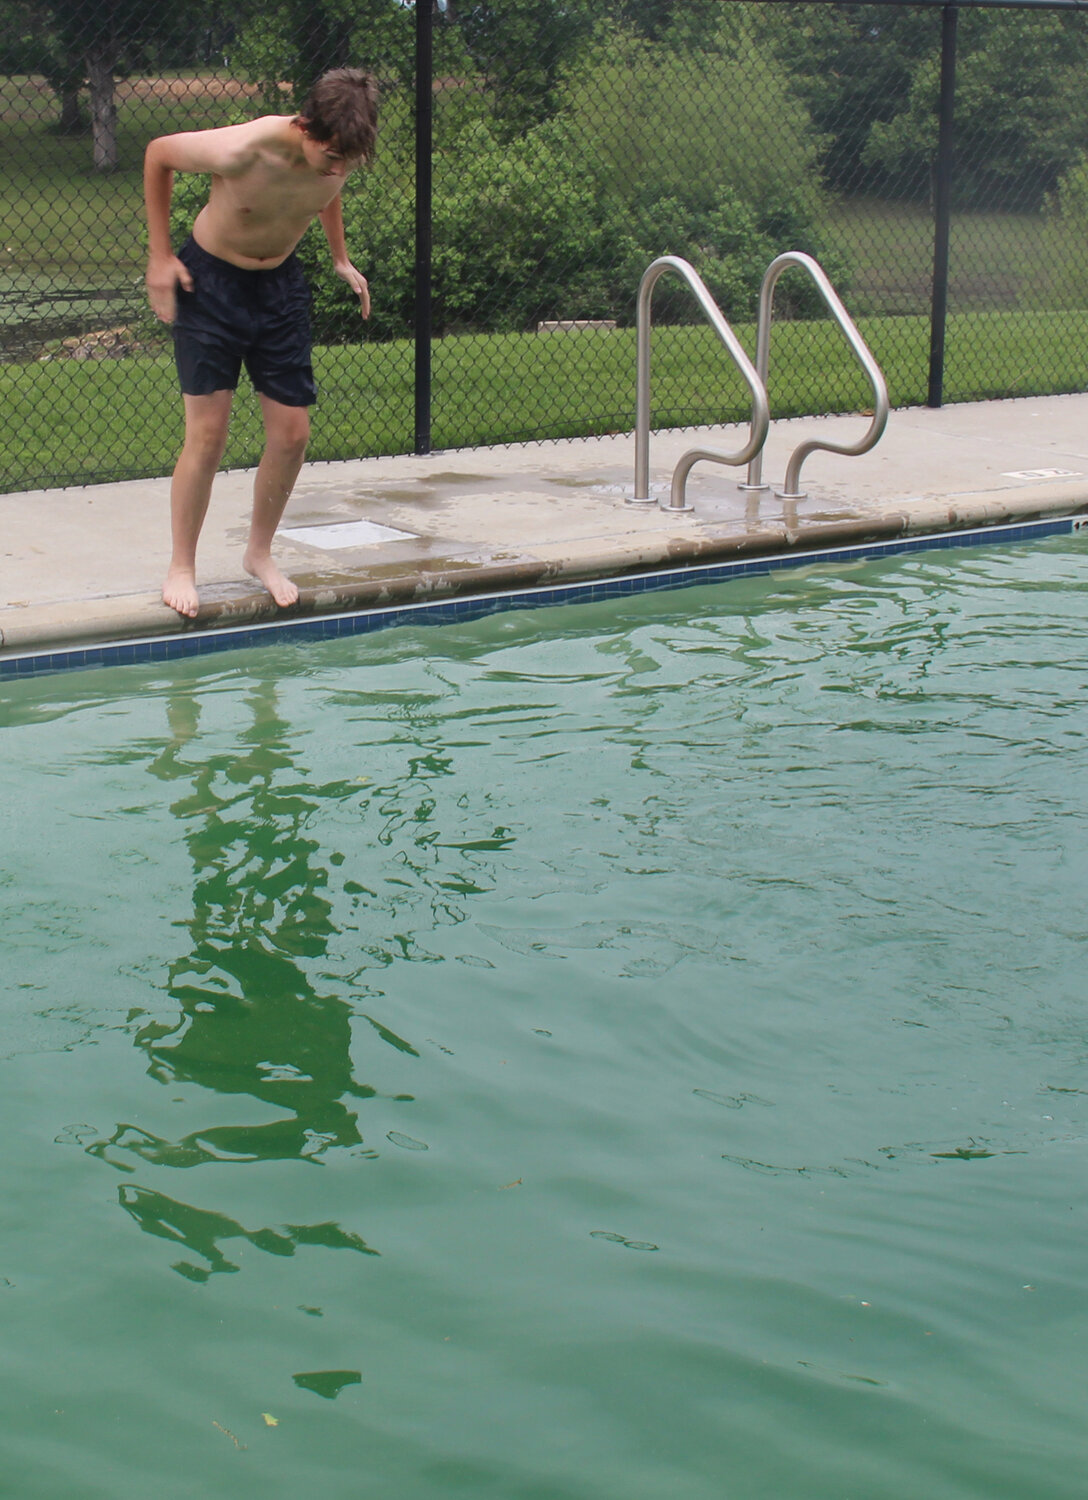 Nathanial Kutsch prepares to jump into the outdoor pool at the Warrenton Aquatic Center to retrieve the brick. The outdoor pool is 12-feet deep.